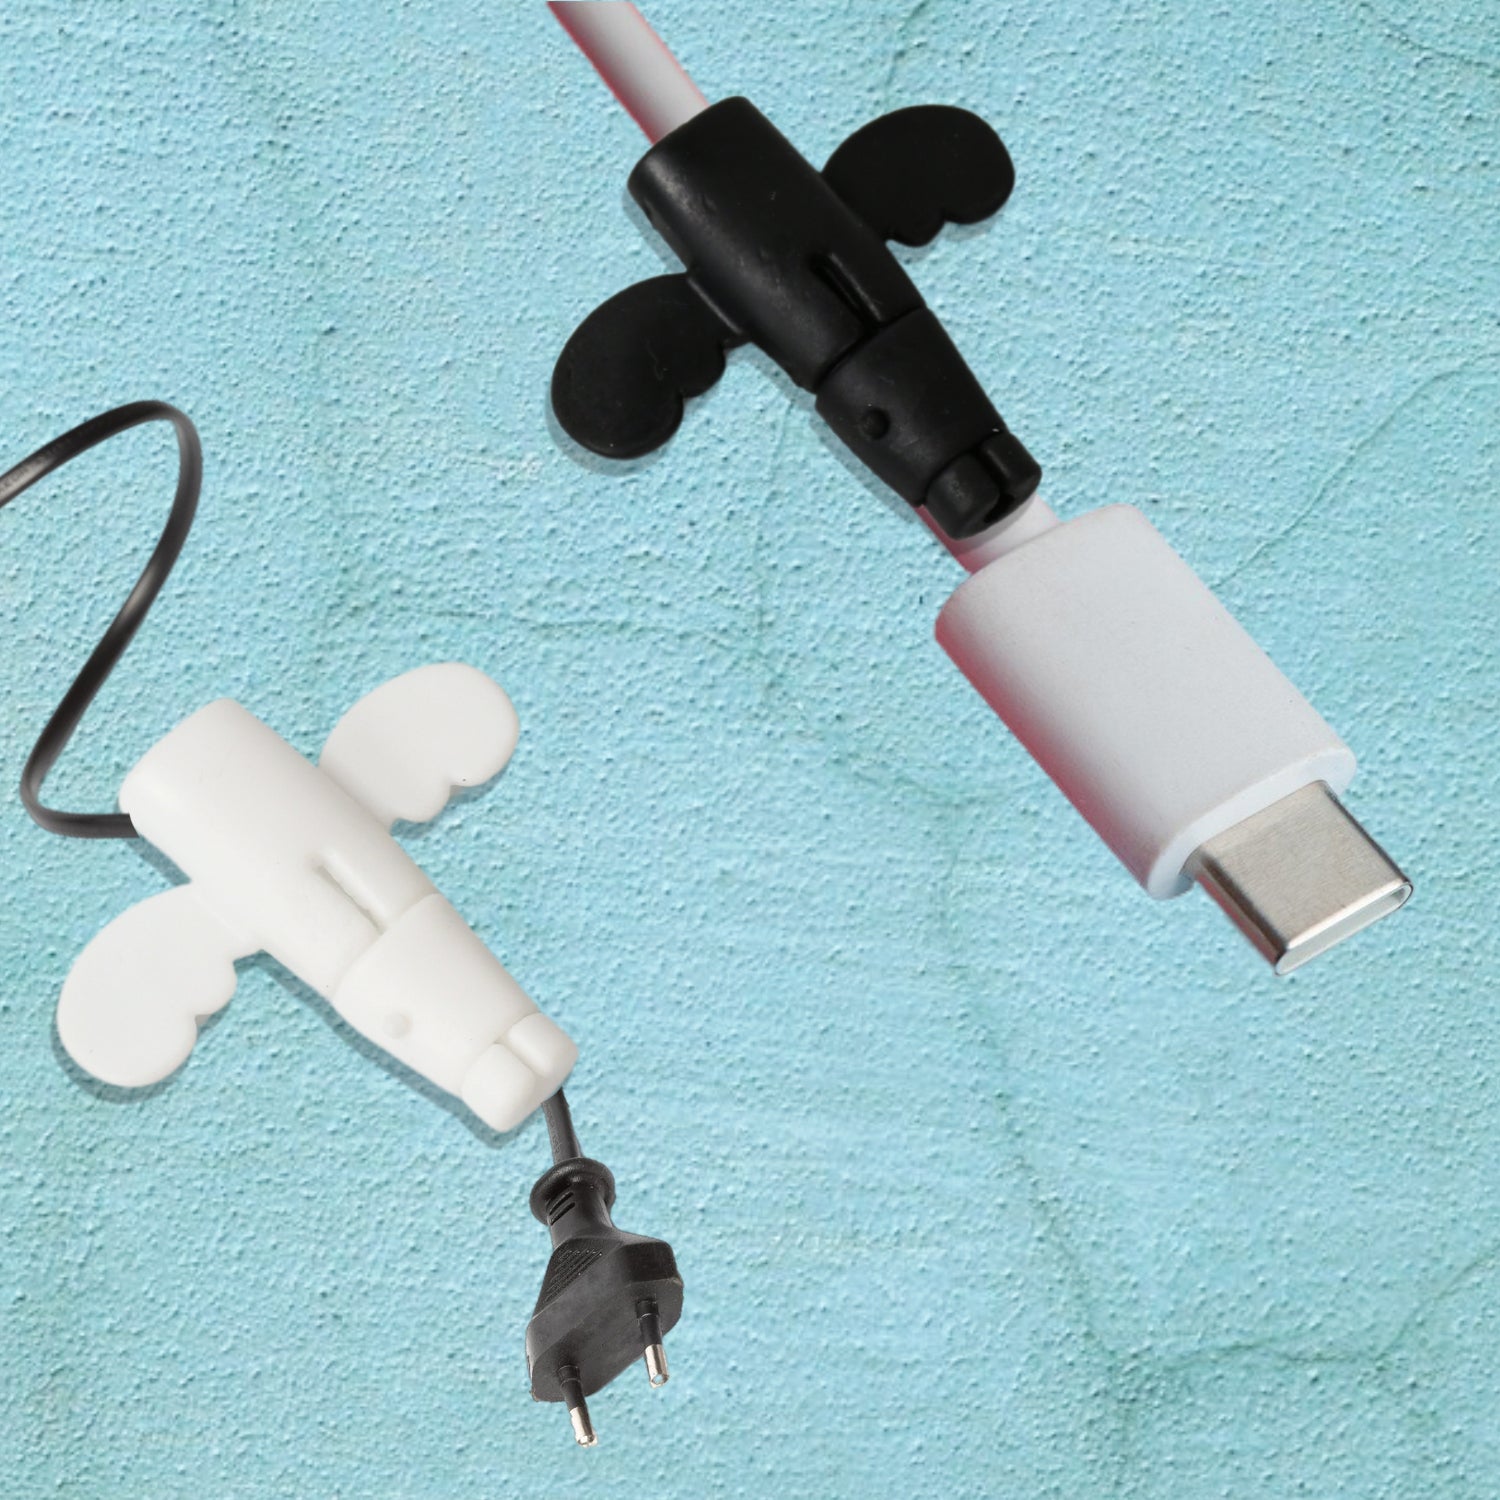 Silicone Data Cable Protector, Angel Data Cable Protective Cover, 2 in 1 Mobile Phone Cord Earphone Cord Saver Storage Tool